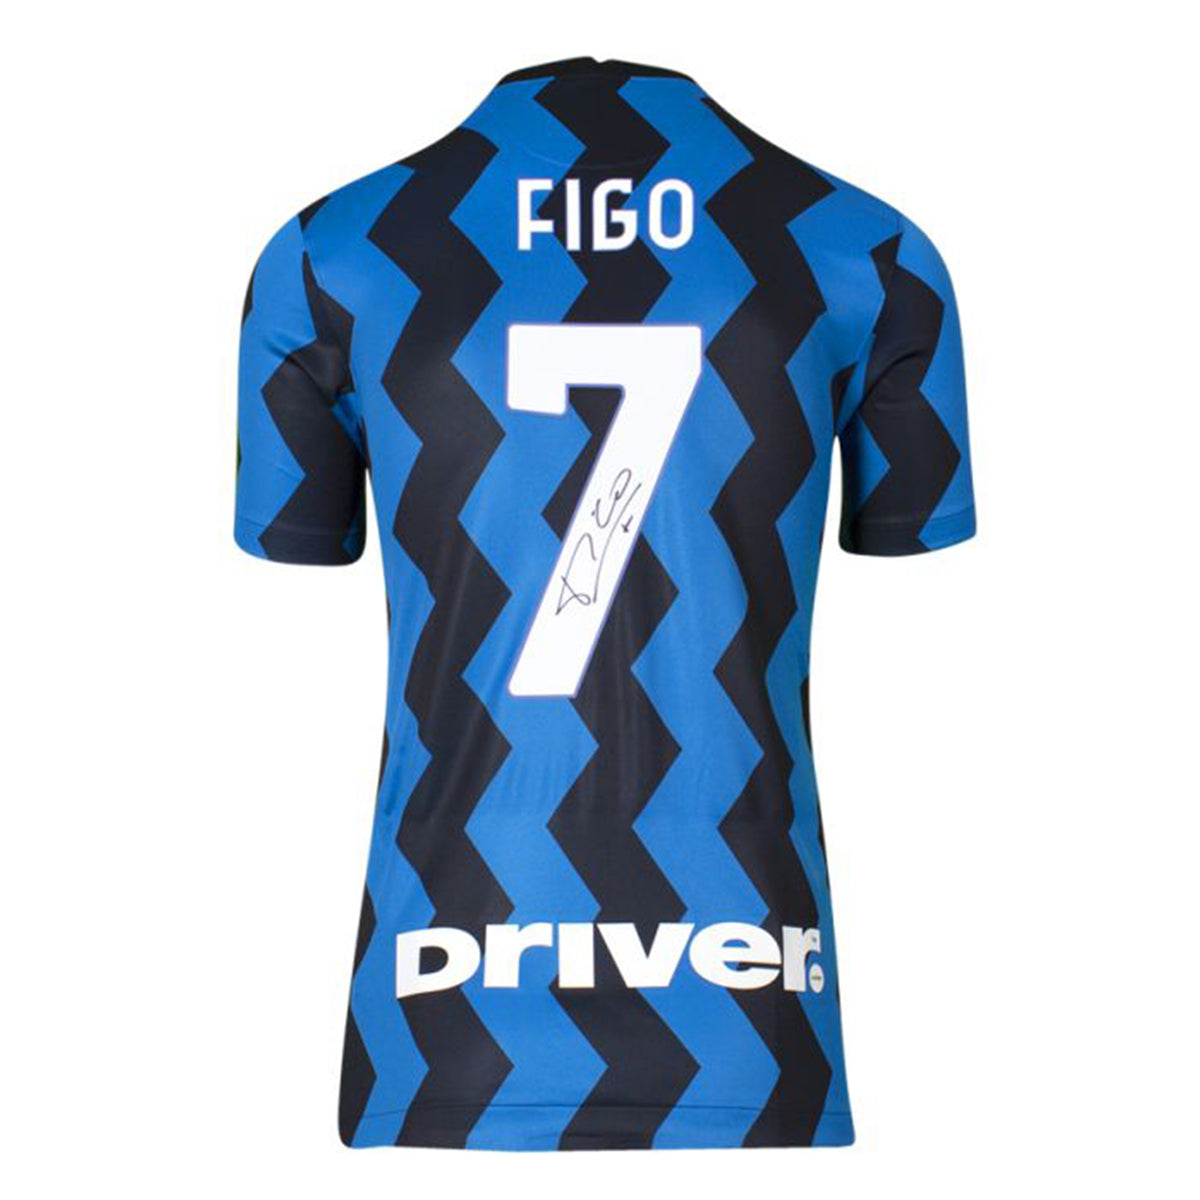 Luis Figo Signed Inter Milan Shirt - 2020-2021, Number 7 (Boxed) - The Bootroom Collection